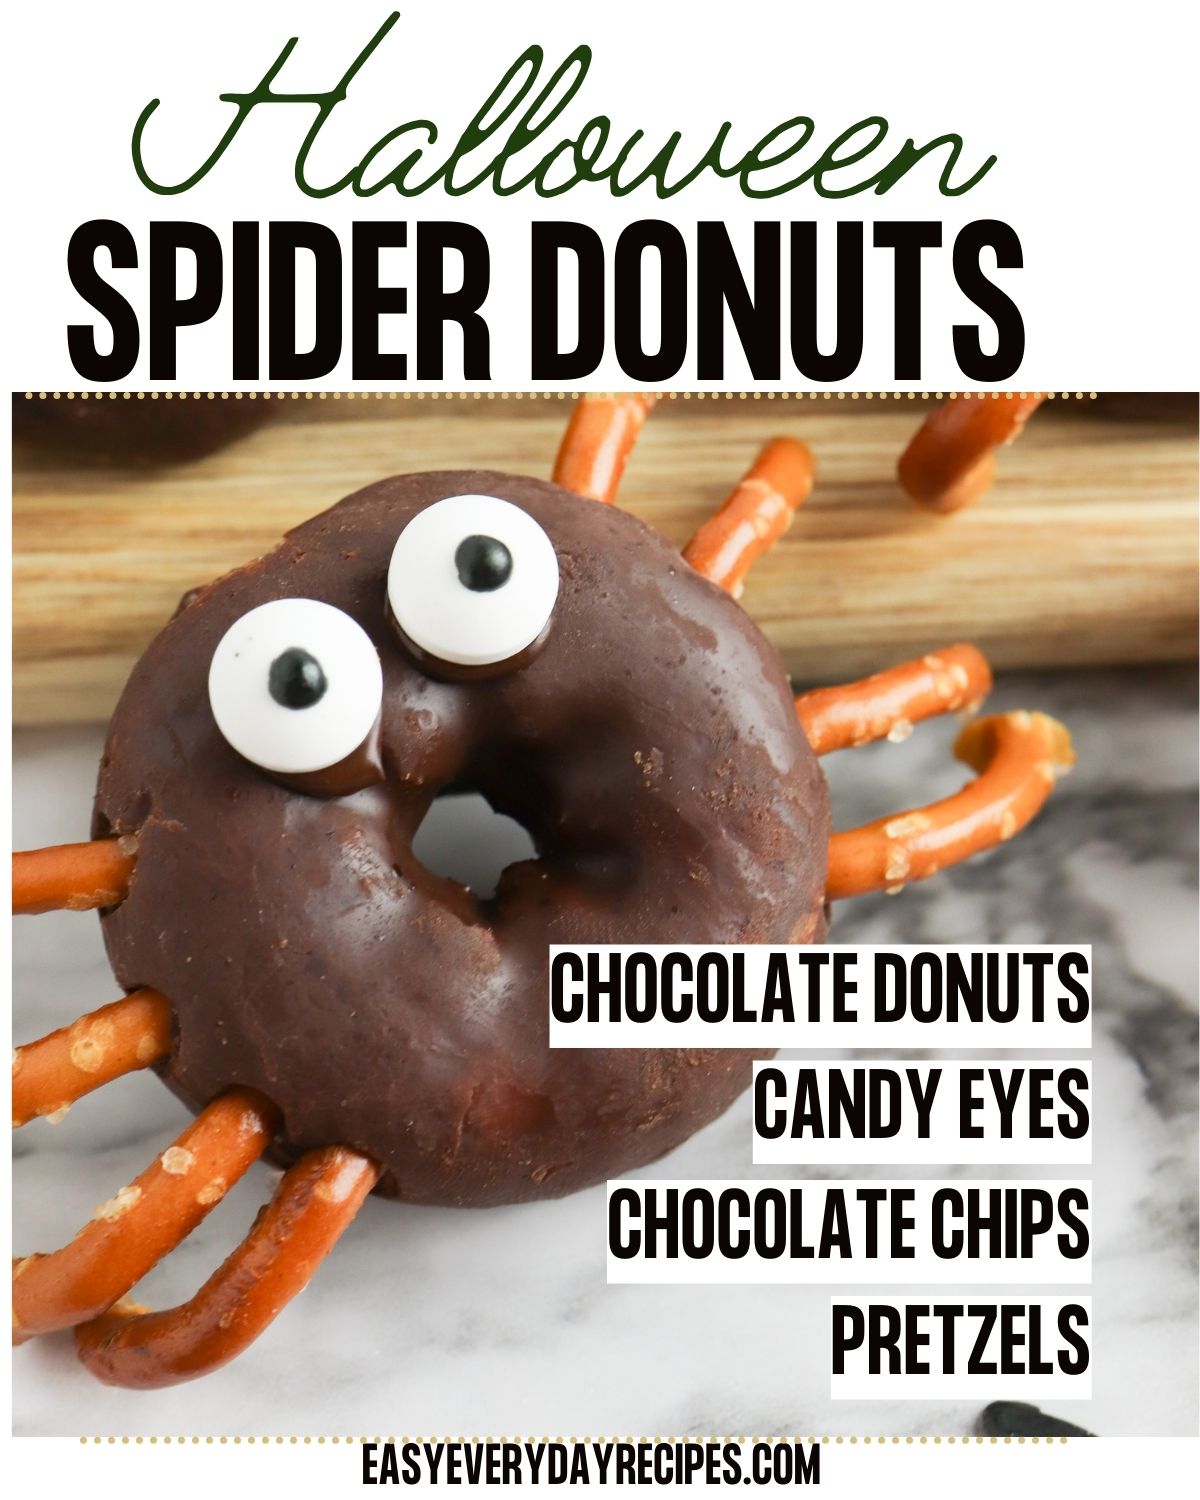 Halloween spider donuts with chocolate donuts and candy eyes.